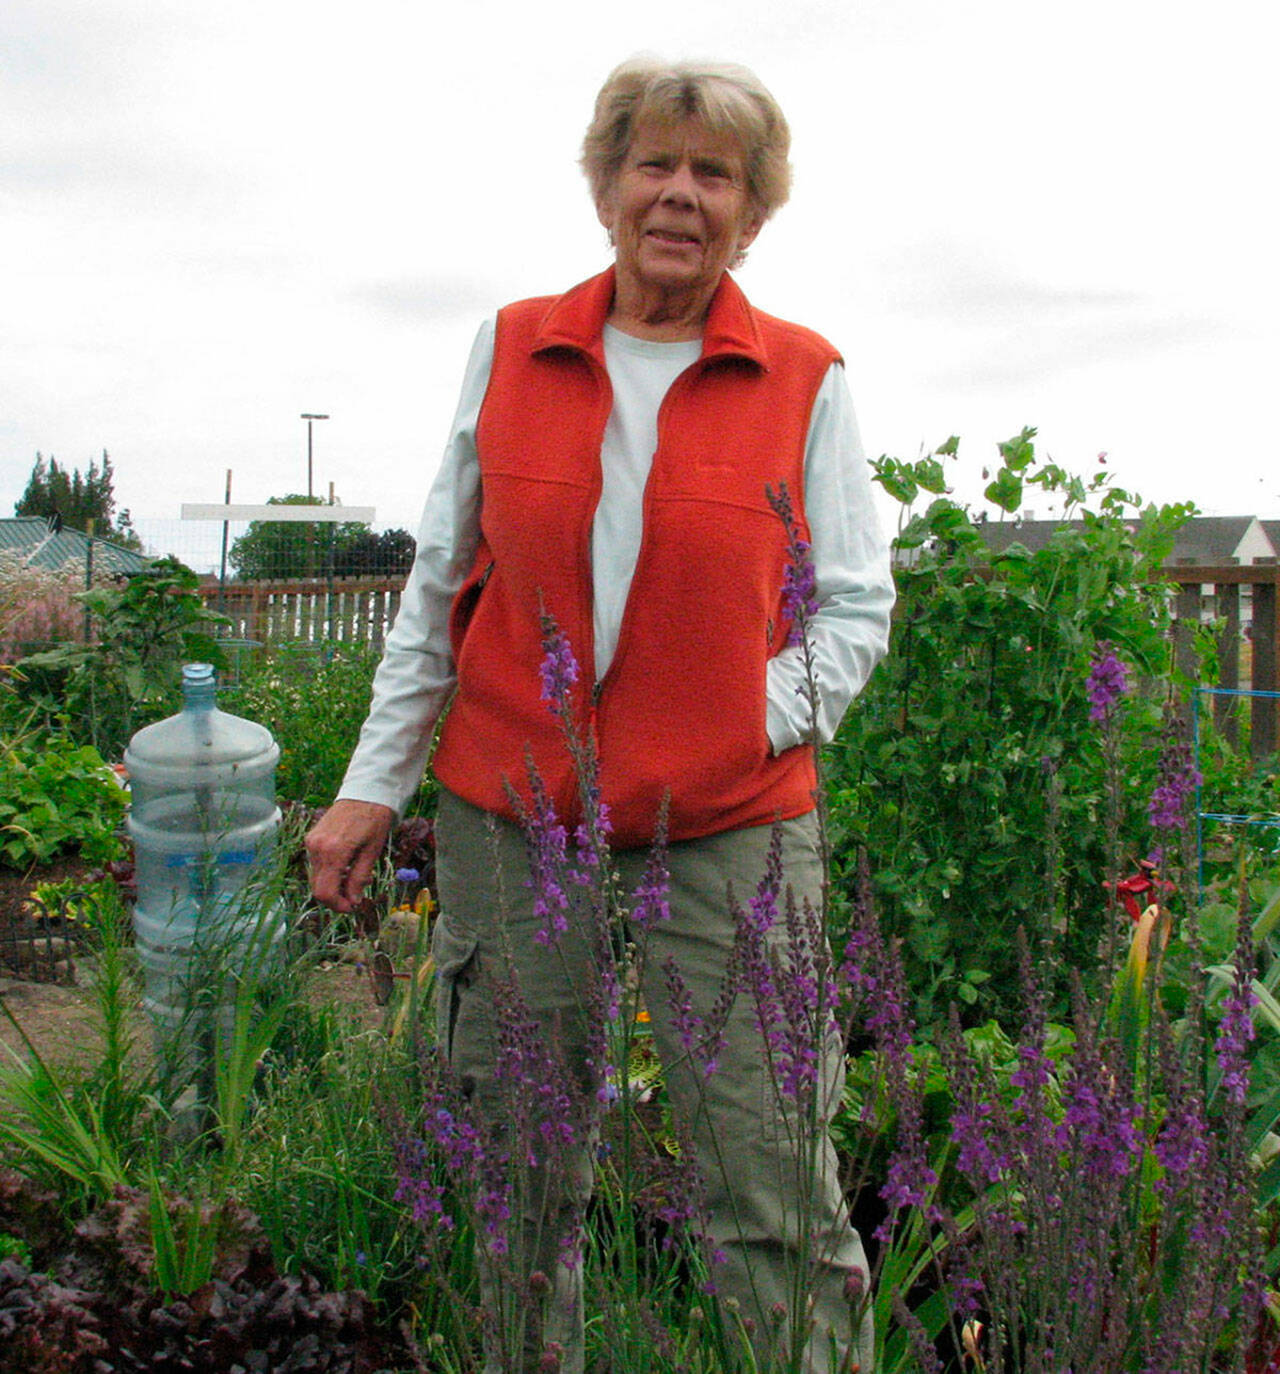 A Celebration of Life for Pam Larsen, co-founder of the Community Organic Garden of Sequim, is set for Saturday in the garden at 3 p.m. She helped start the Fir Street garden in 2008. (Photo courtesy Clallam County Master Gardeners)